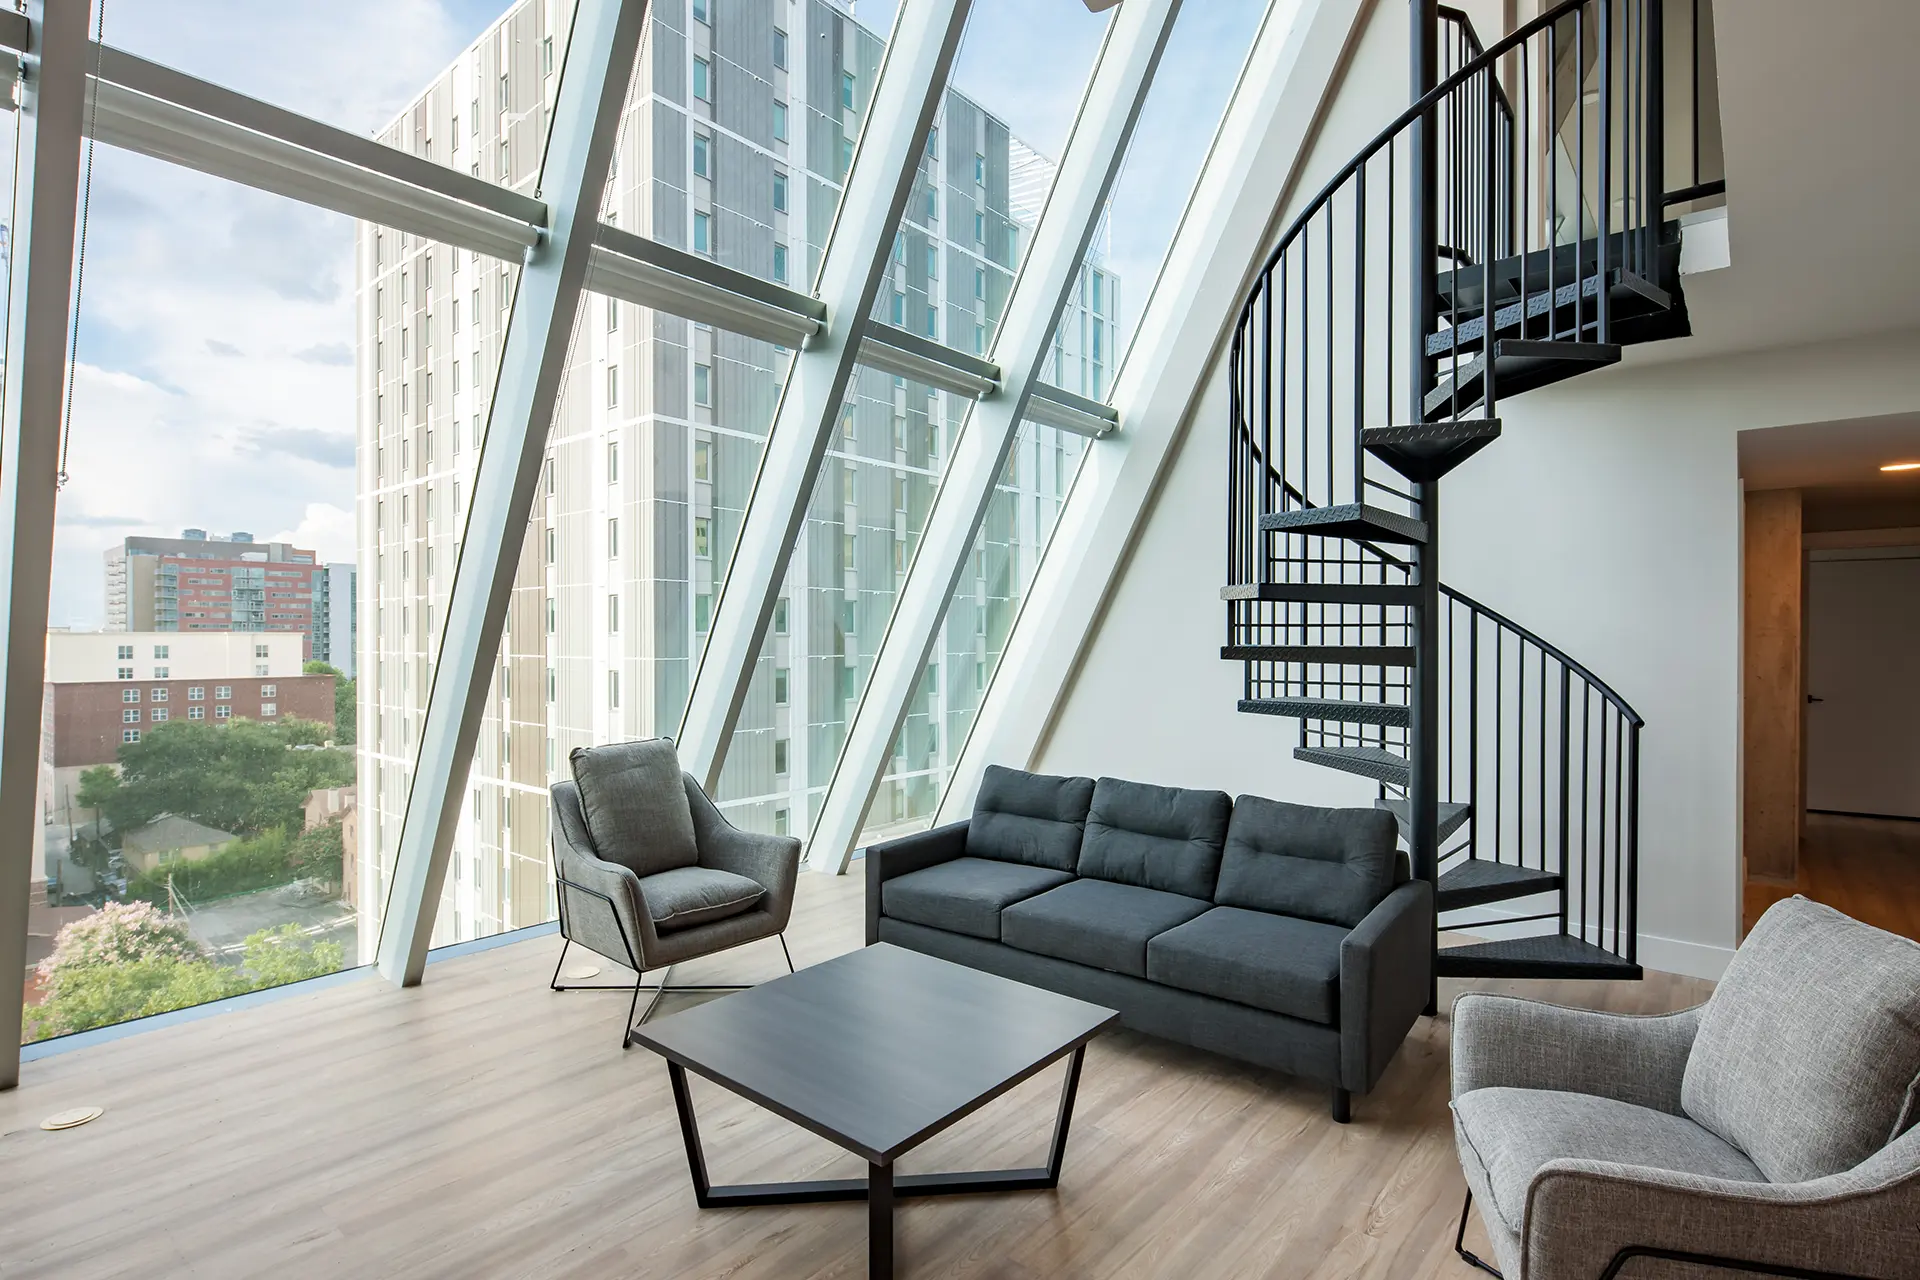 luxury two-story student apartment with spiral staircase and sloped floor to ceiling windows.